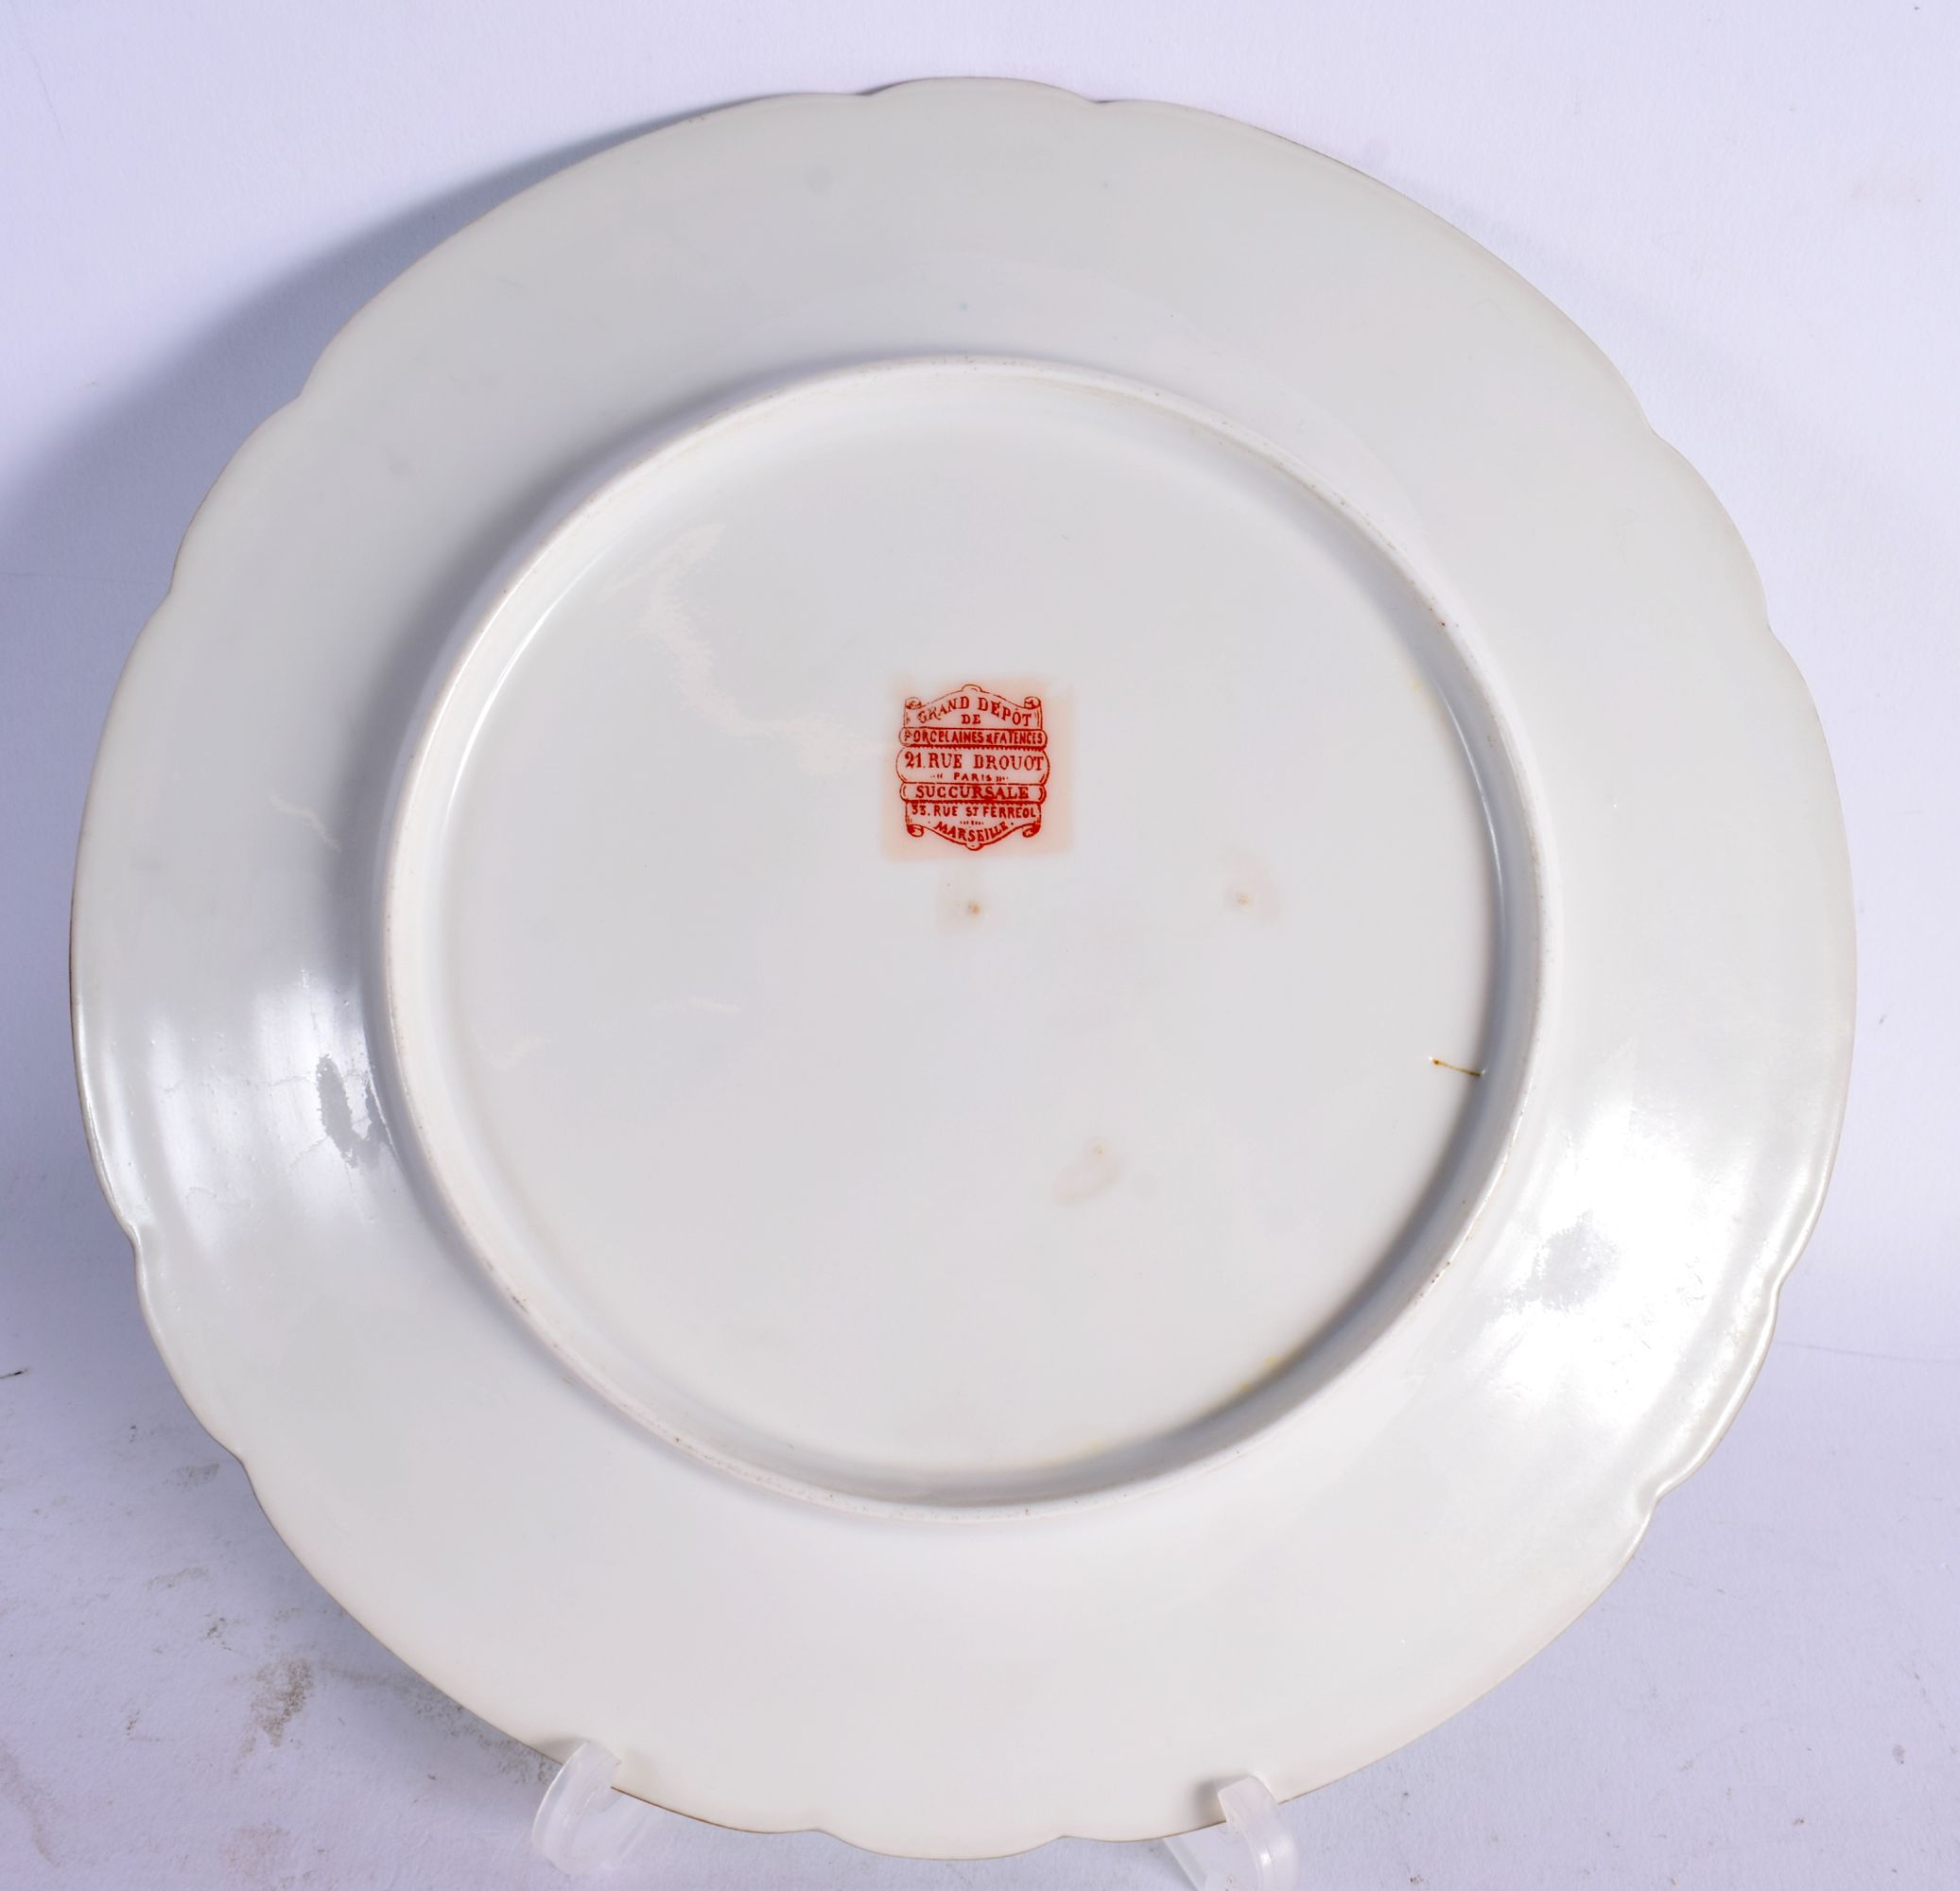 A LARGE AND EXTENSIVE LATE 19TH CENTURY FRENCH PORCELAIN DINNER SERVICE painted with a monogram. Lar - Image 11 of 14